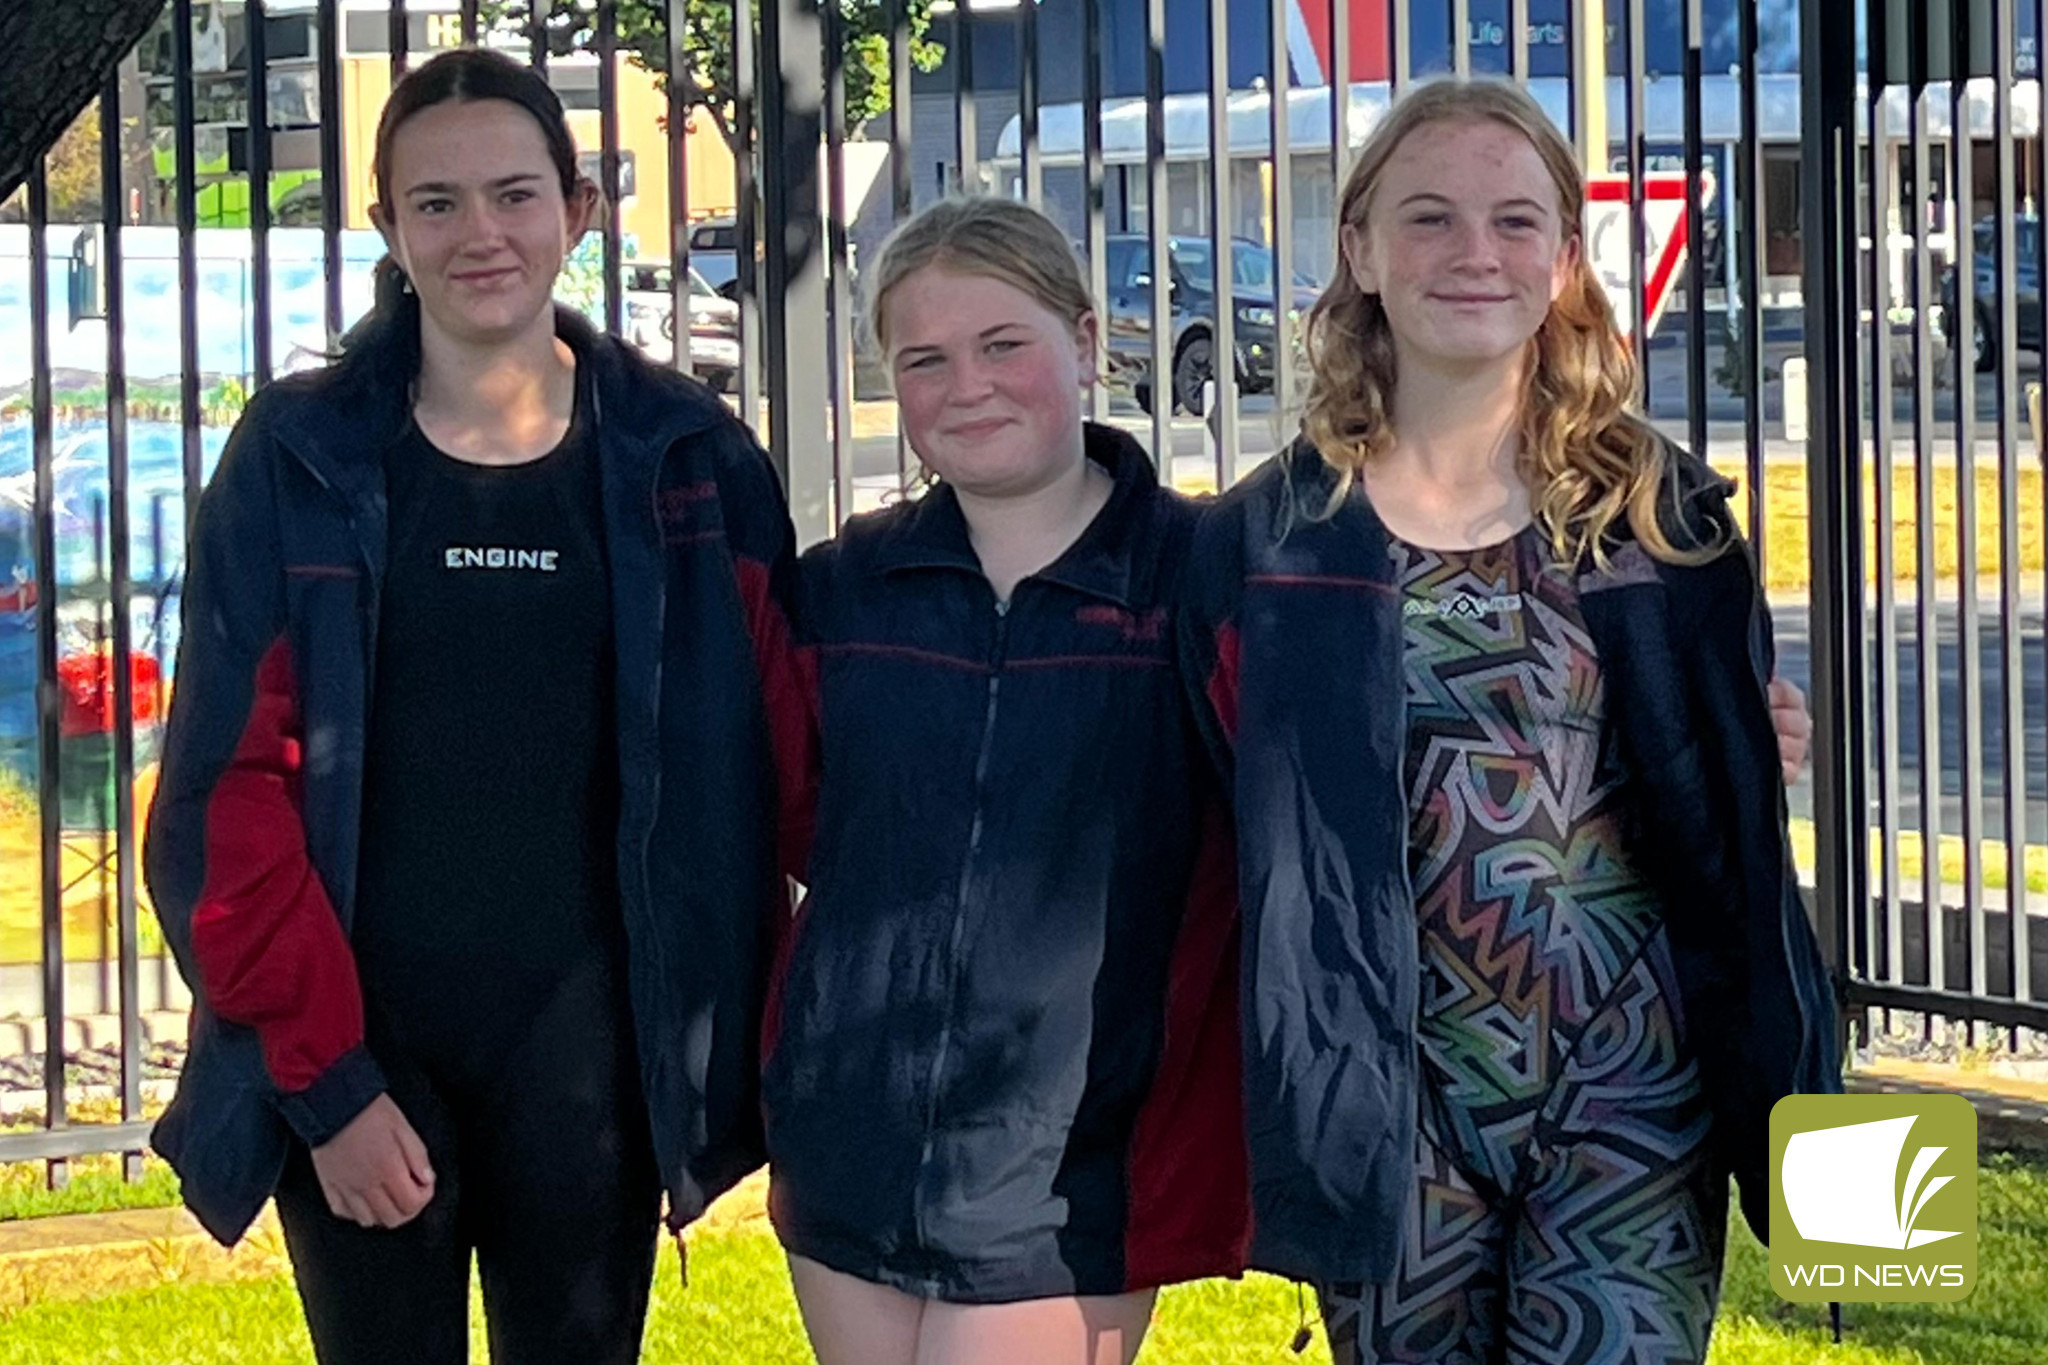 Jackenzie and Summer Sharp, along with Parker McDougall, represented Terang College at last Friday’s regional finals in Horsham.